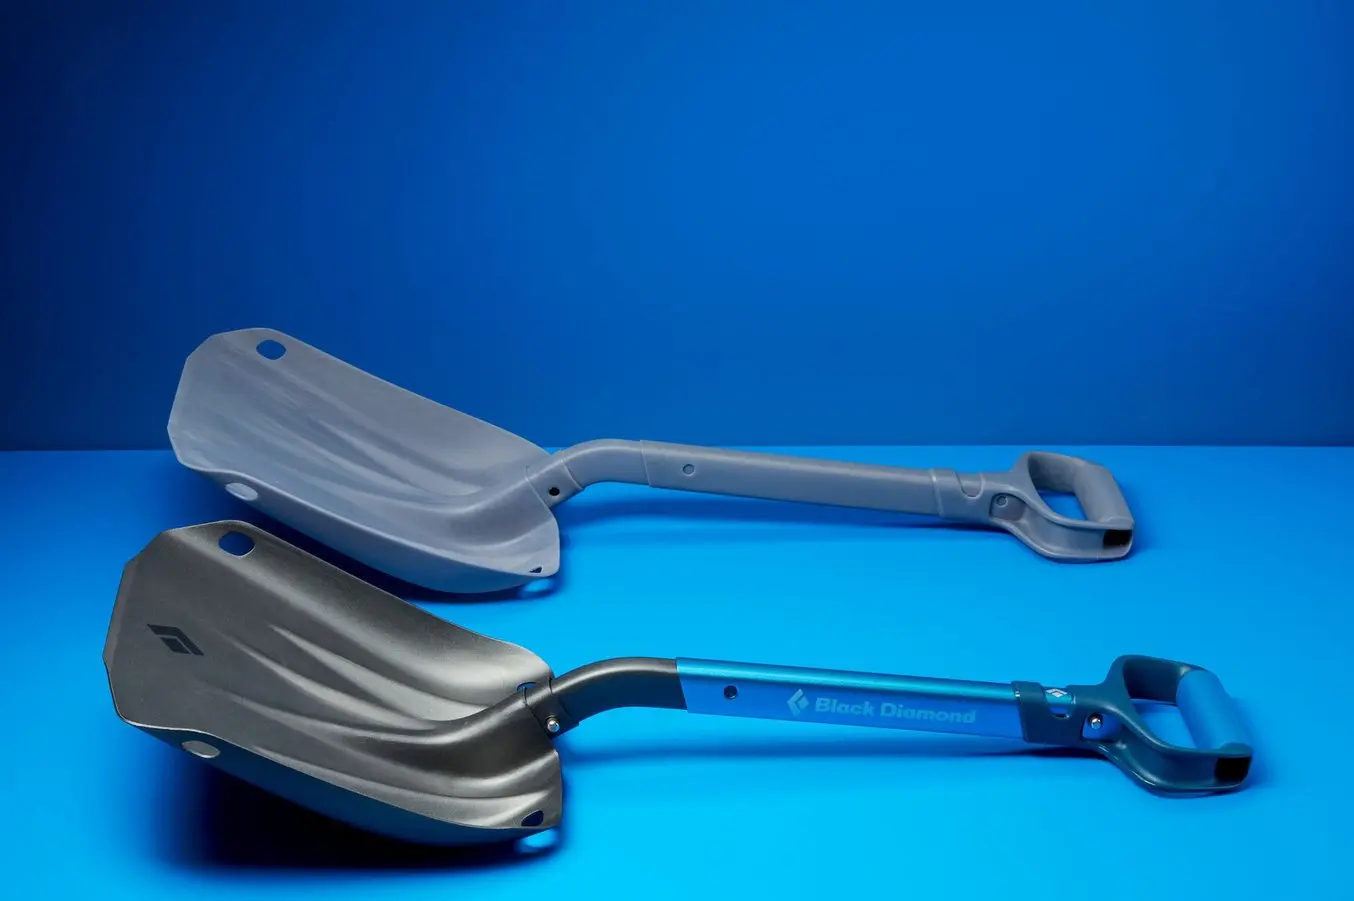 a prototype of a Black Diamond shovel on a blue background next to the real end-use manufactured shovel